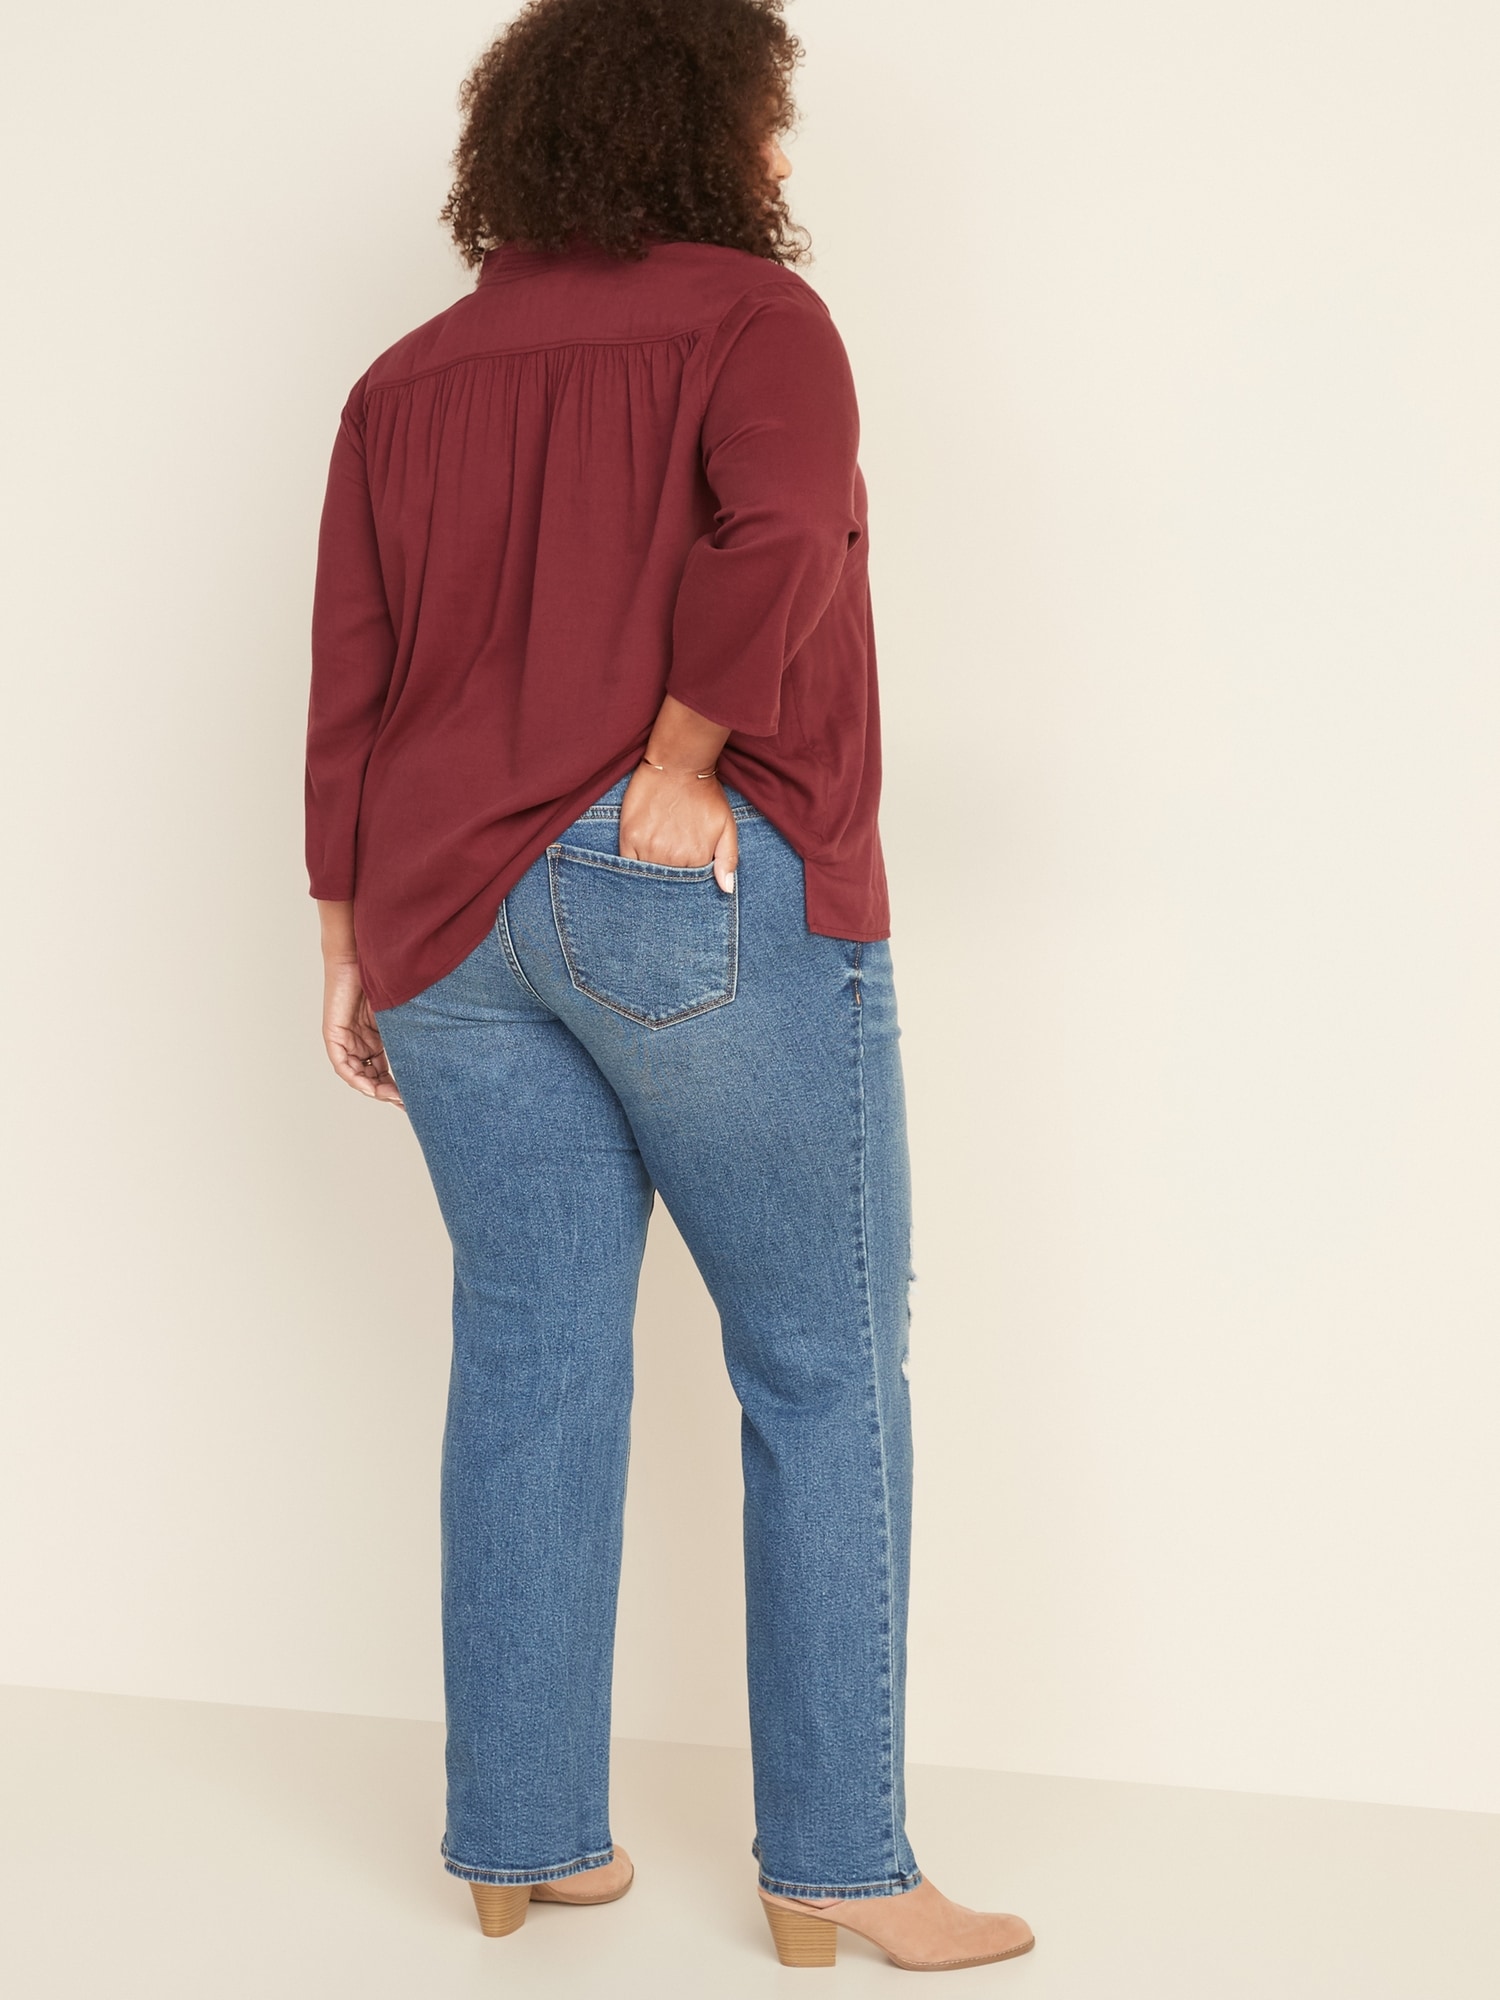 pull on bootcut jeans plus size